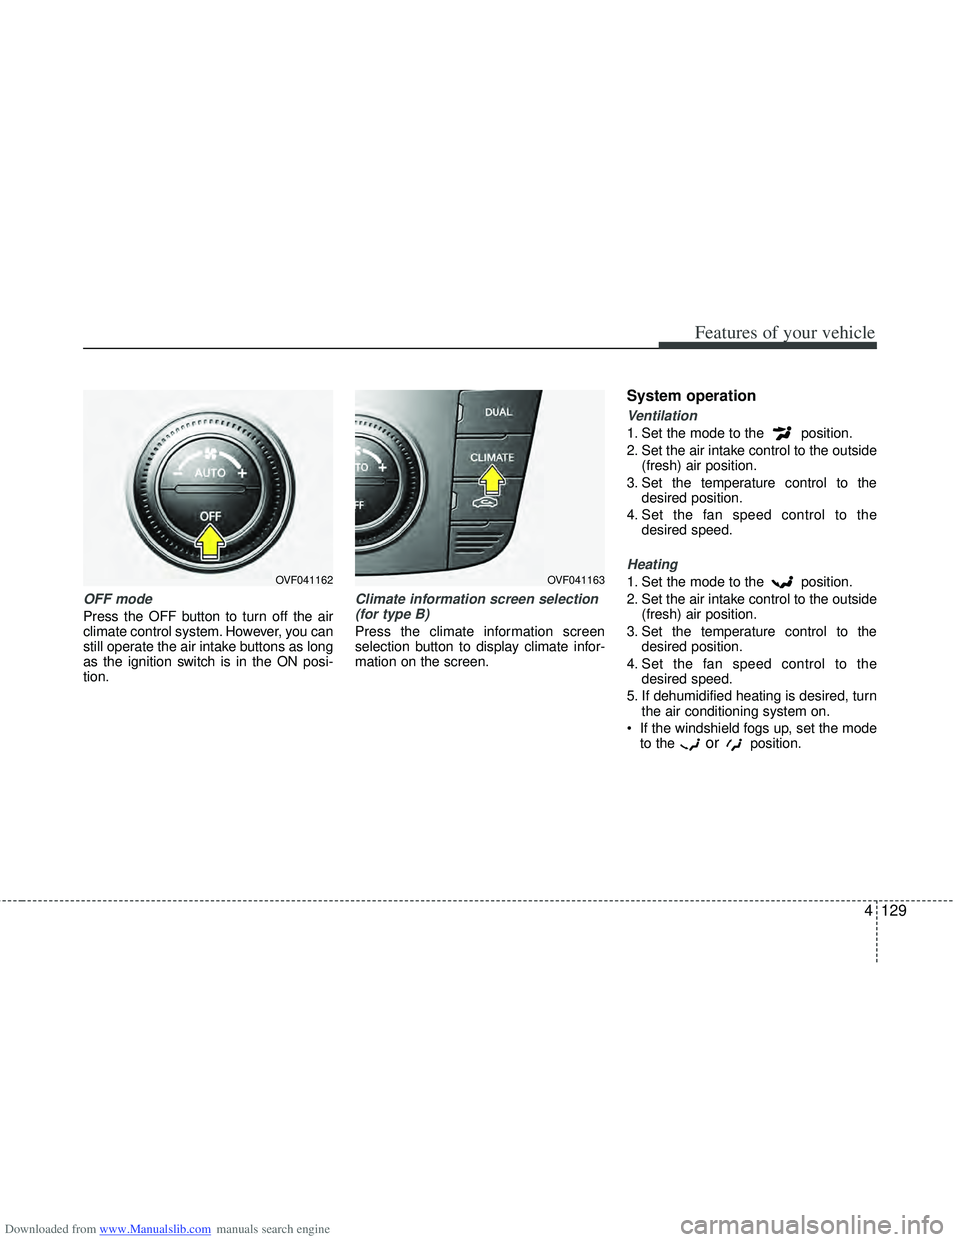 HYUNDAI I40 2013  Owners Manual Downloaded from www.Manualslib.com manuals search engine 4129
Features of your vehicle
OFF mode
Press the OFF button to turn off the air
climate control system. However, you can
still operate the air 